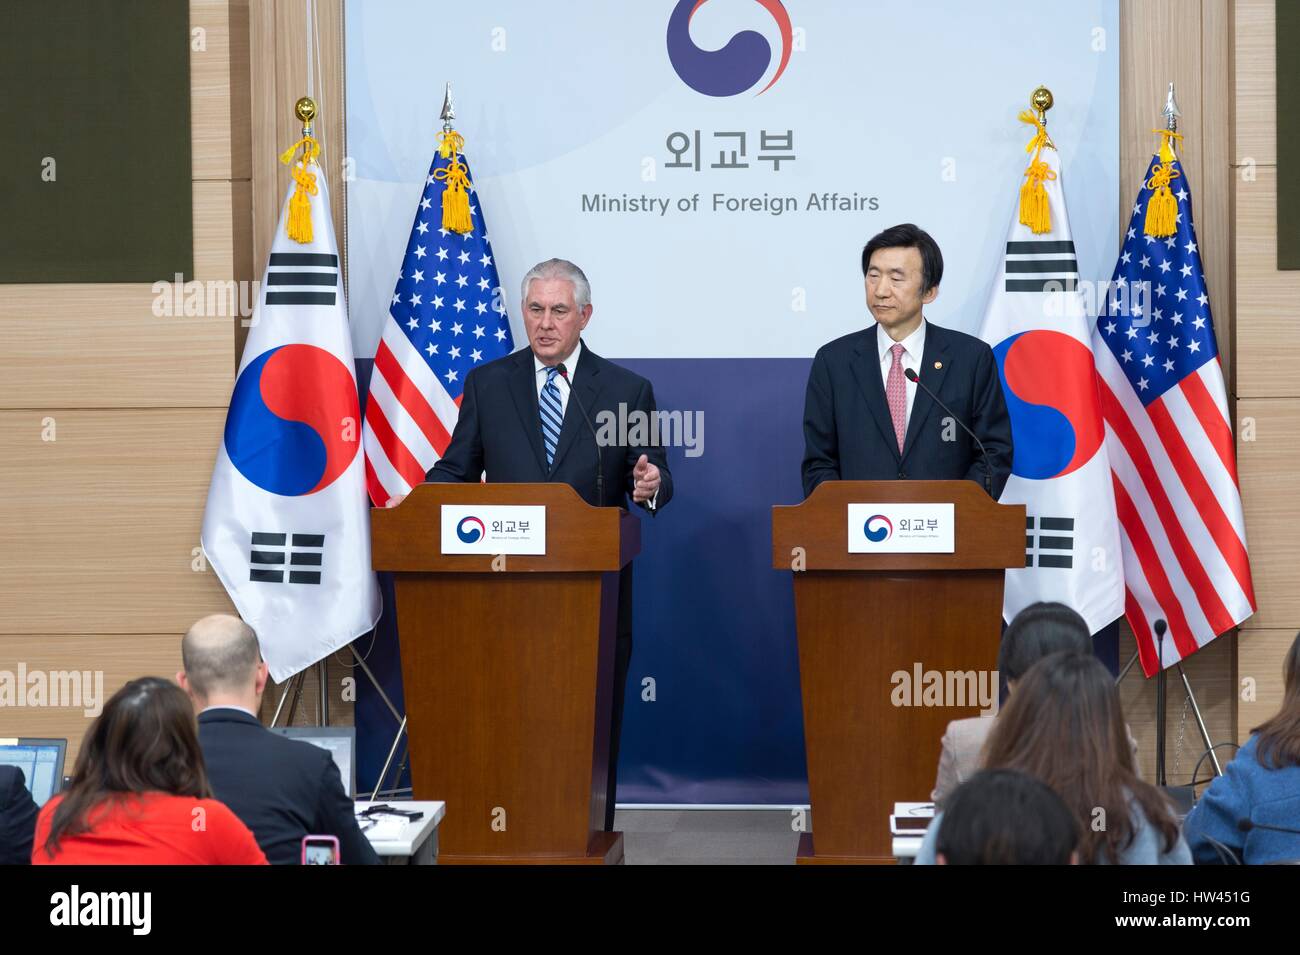 Seoul, South Korea. 17th March 2017. U.S. Secretary of State Rex Tillerson during a joint press conference with South Korean Foreign Minister Yun Byung-se at the Ministry of Foreign Affairs March 17, 2017 in Seoul, South Korea. Tillerson is on his first trip to Asia as Secretary of State. Credit: Planetpix/Alamy Live News Stock Photo